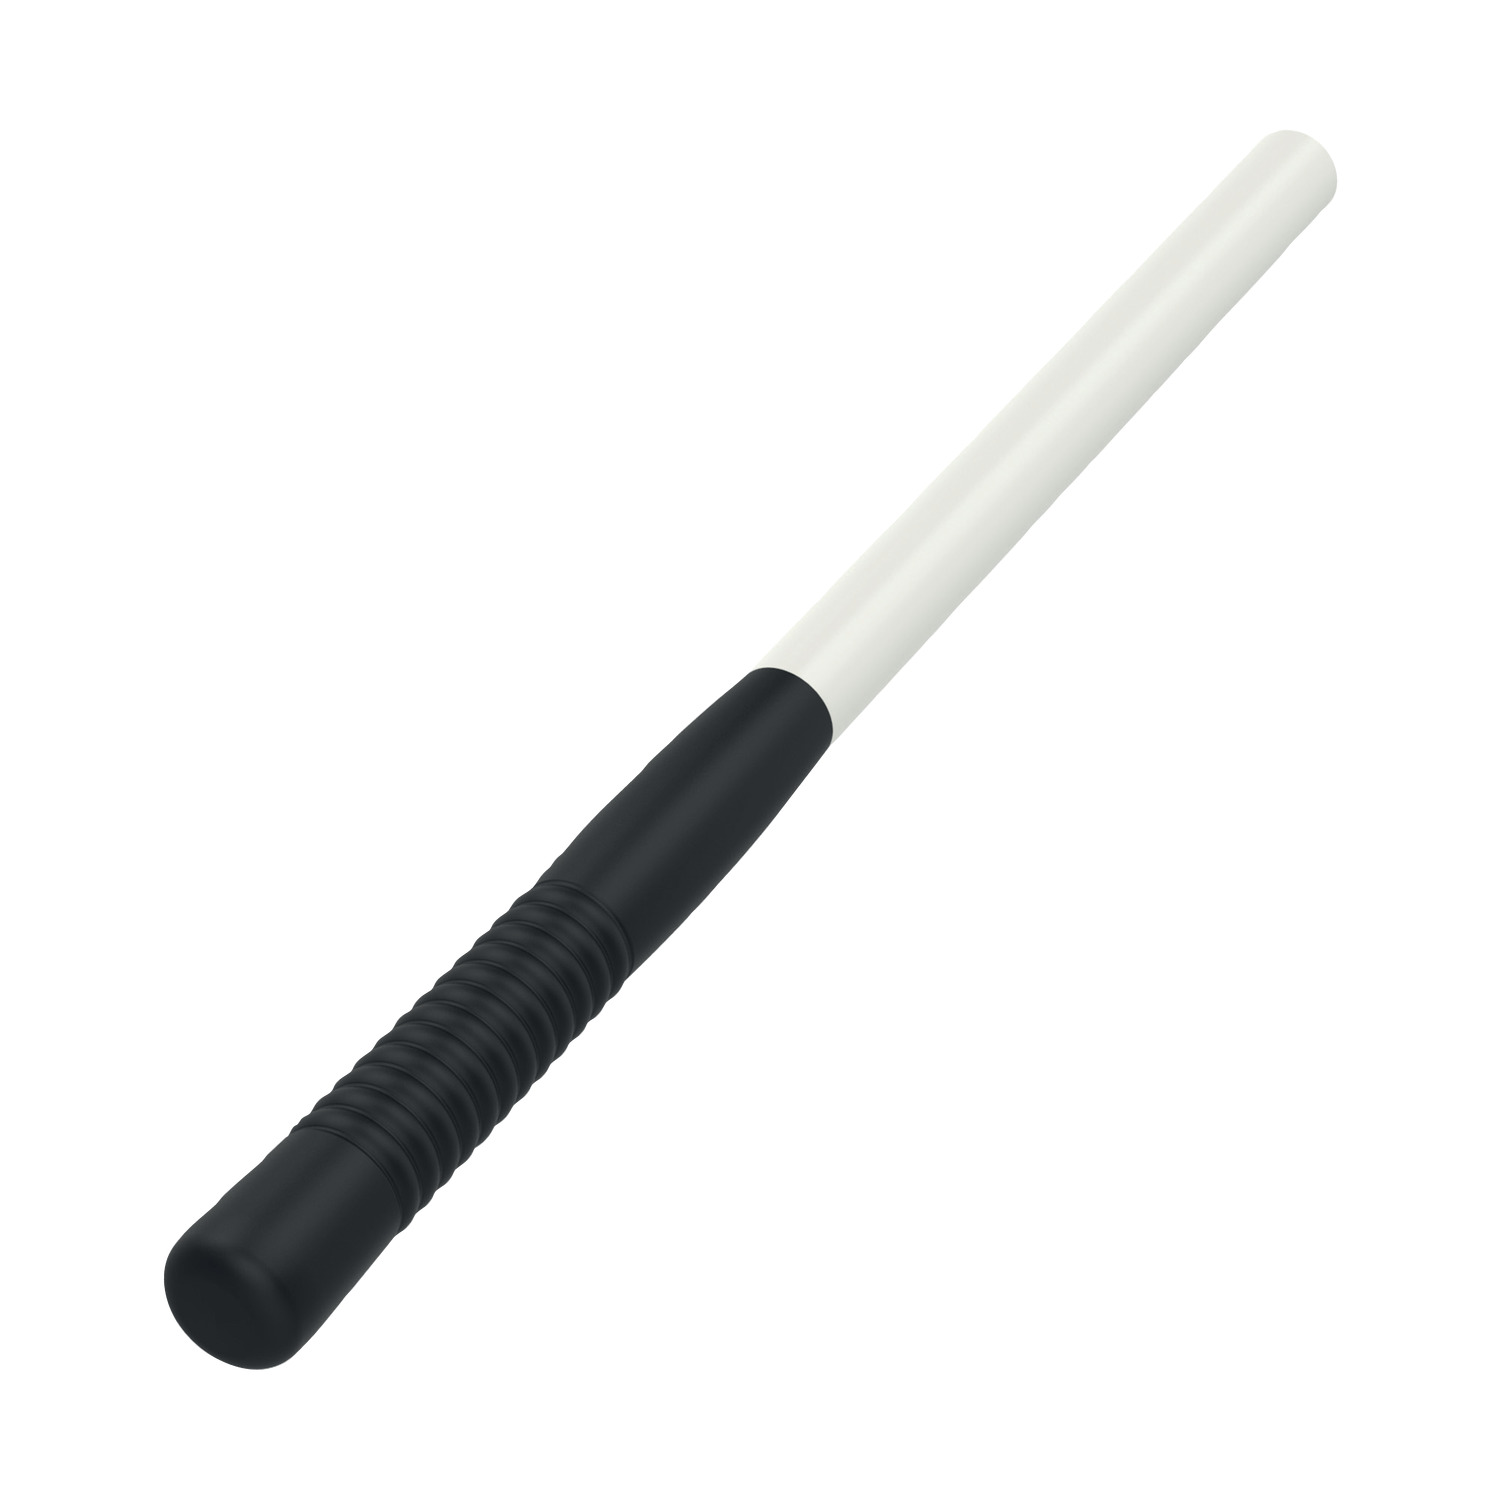 Product 98223, Handle - for Simplex Sledge Hammers fibreglass - for no. 98221 / 